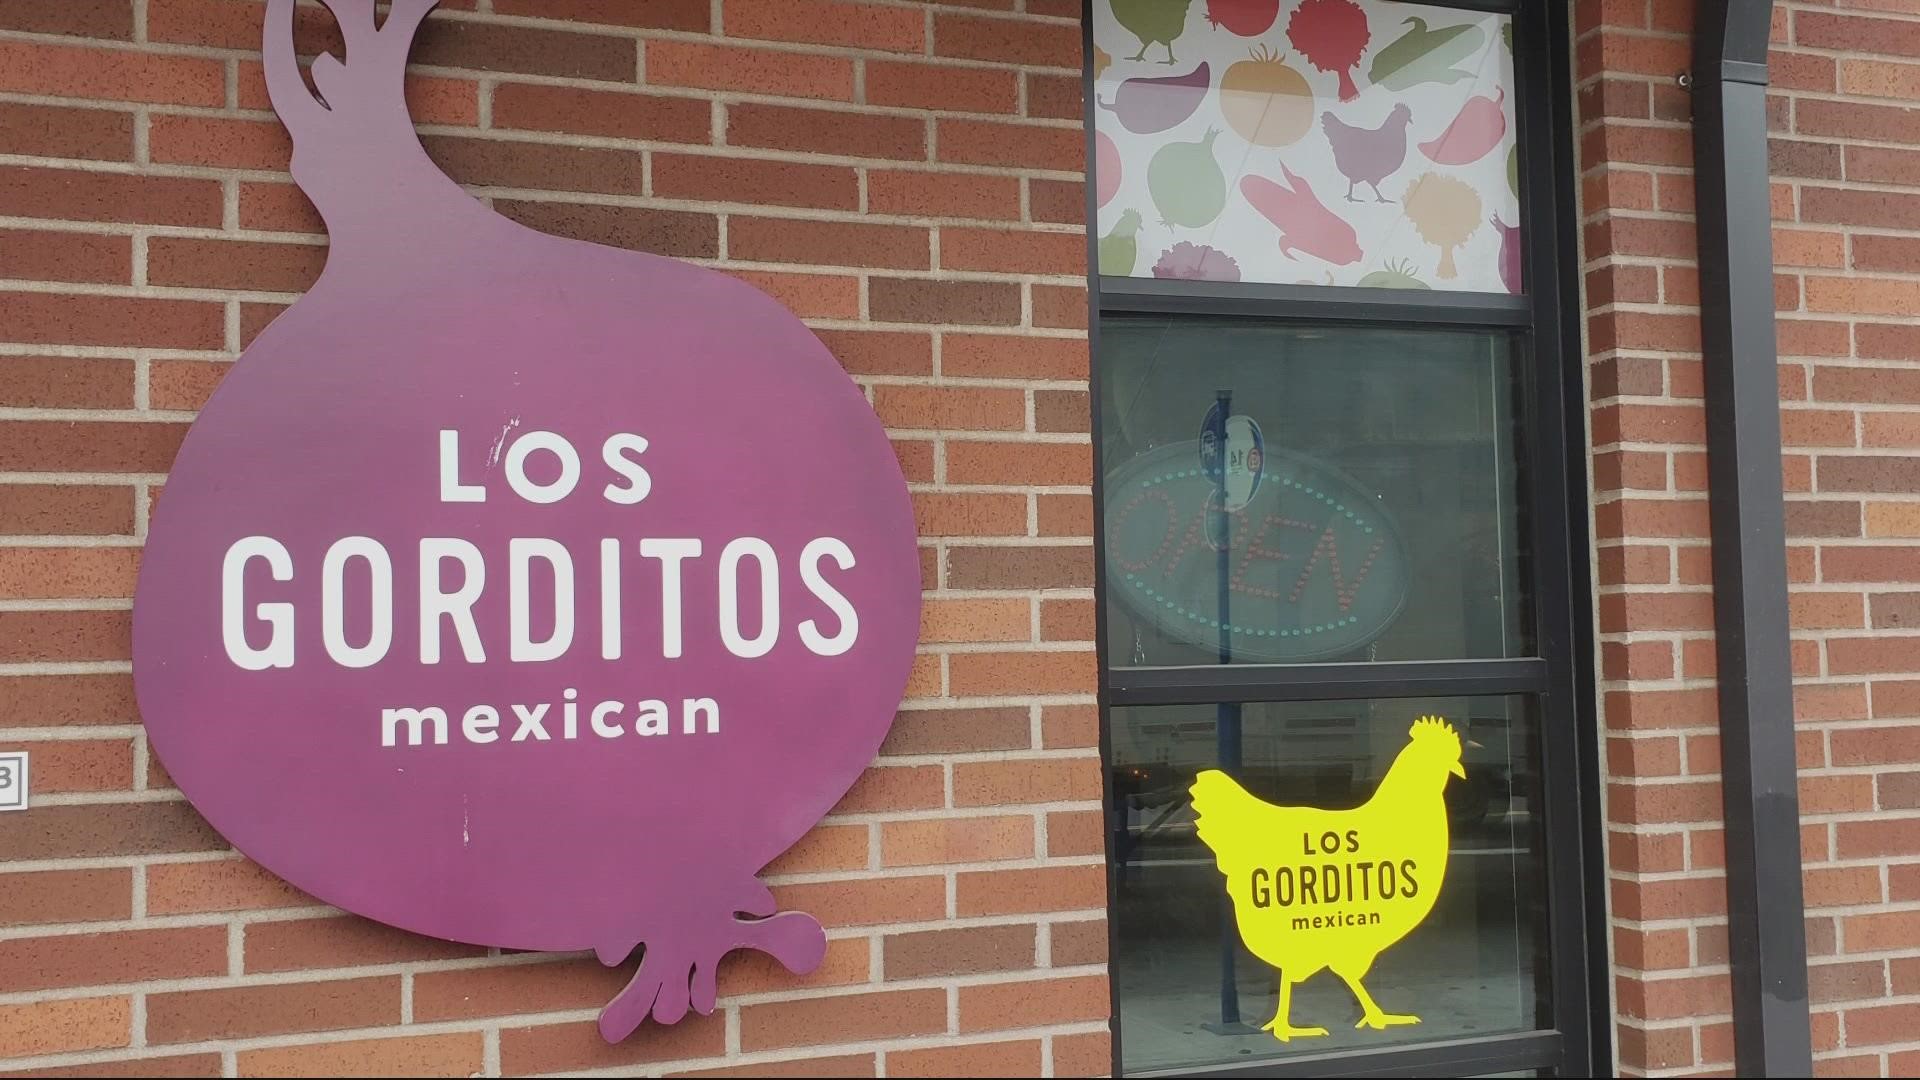 Before COVID hit, Los Gorditos was a small business success story, growing from a single food truck to five brick-and-mortar restaurants.